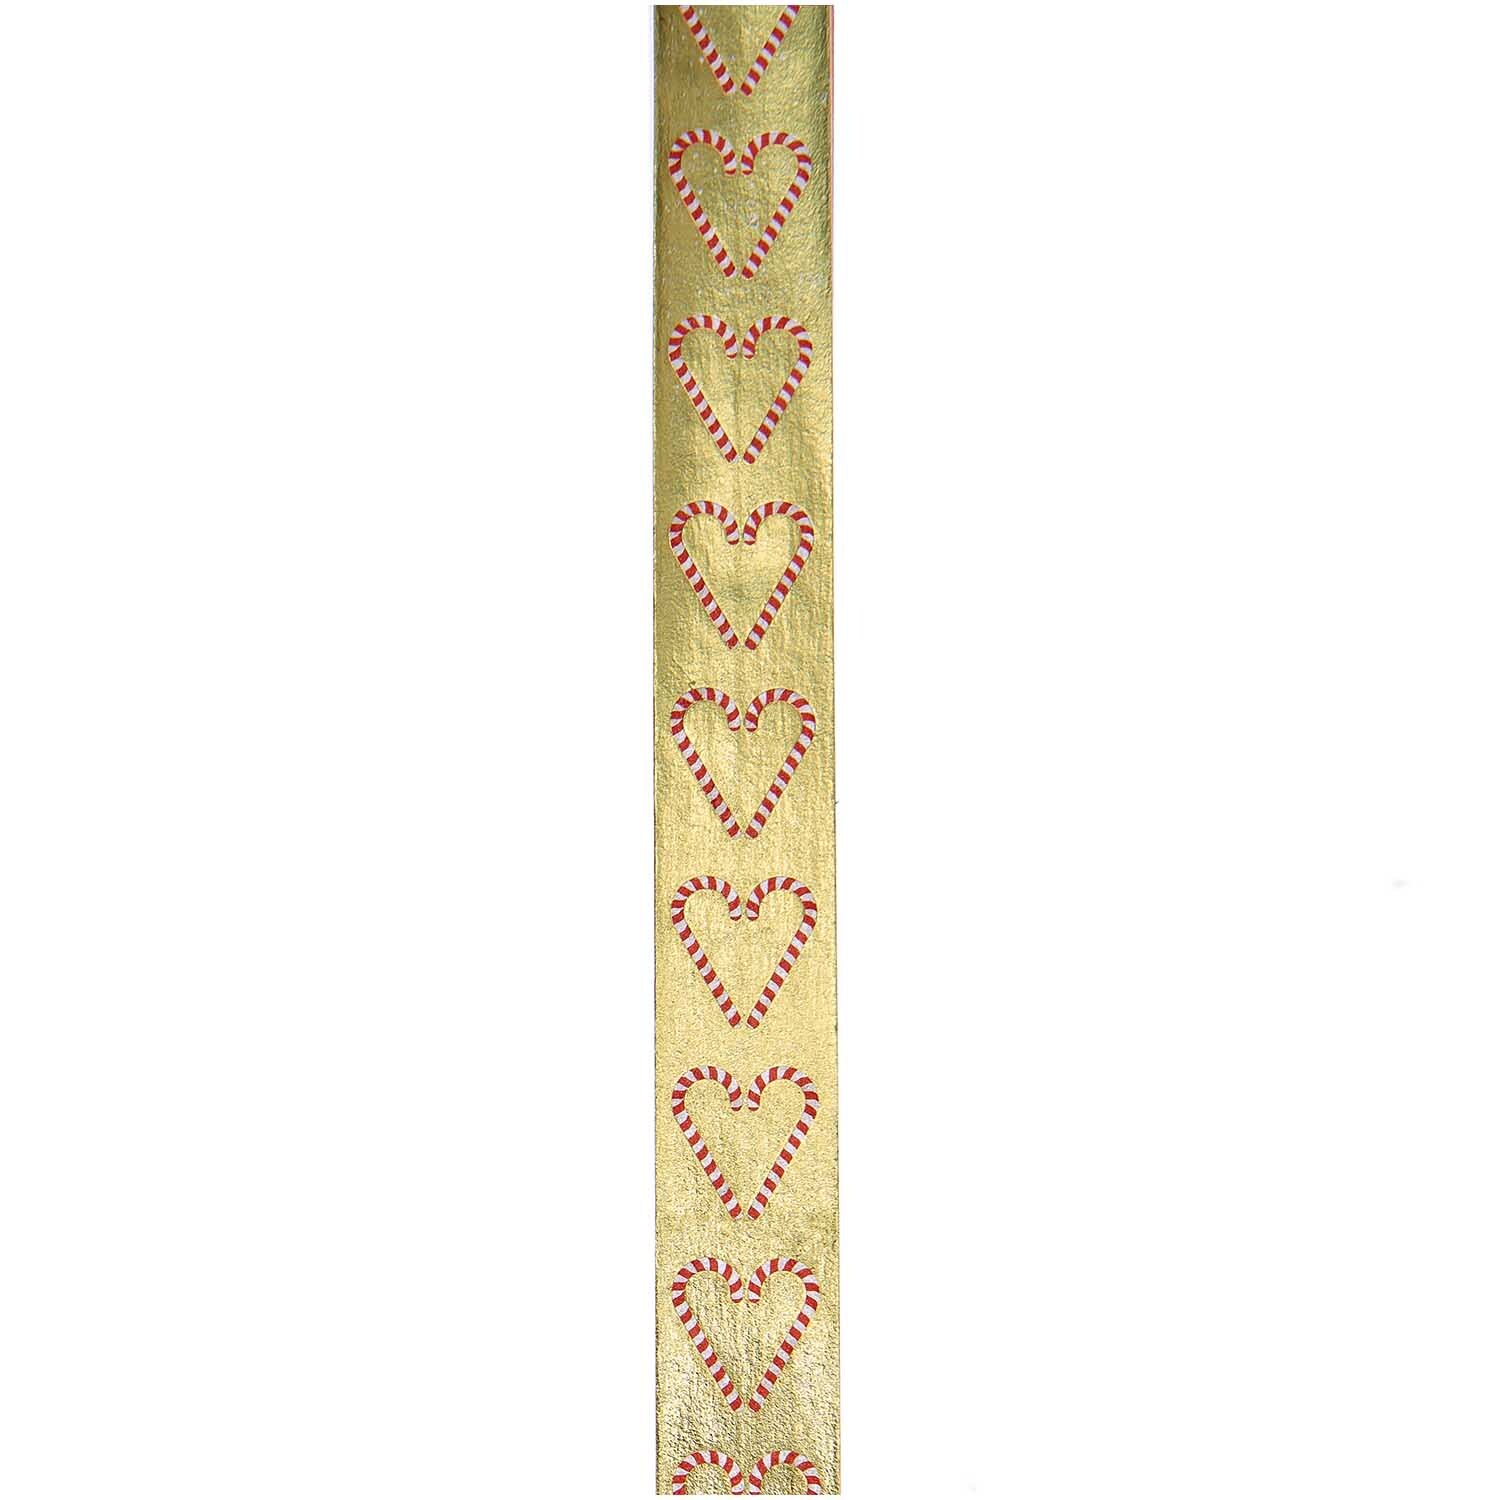 Paper Poetry Tape Candy Cane 1,5cm 10m